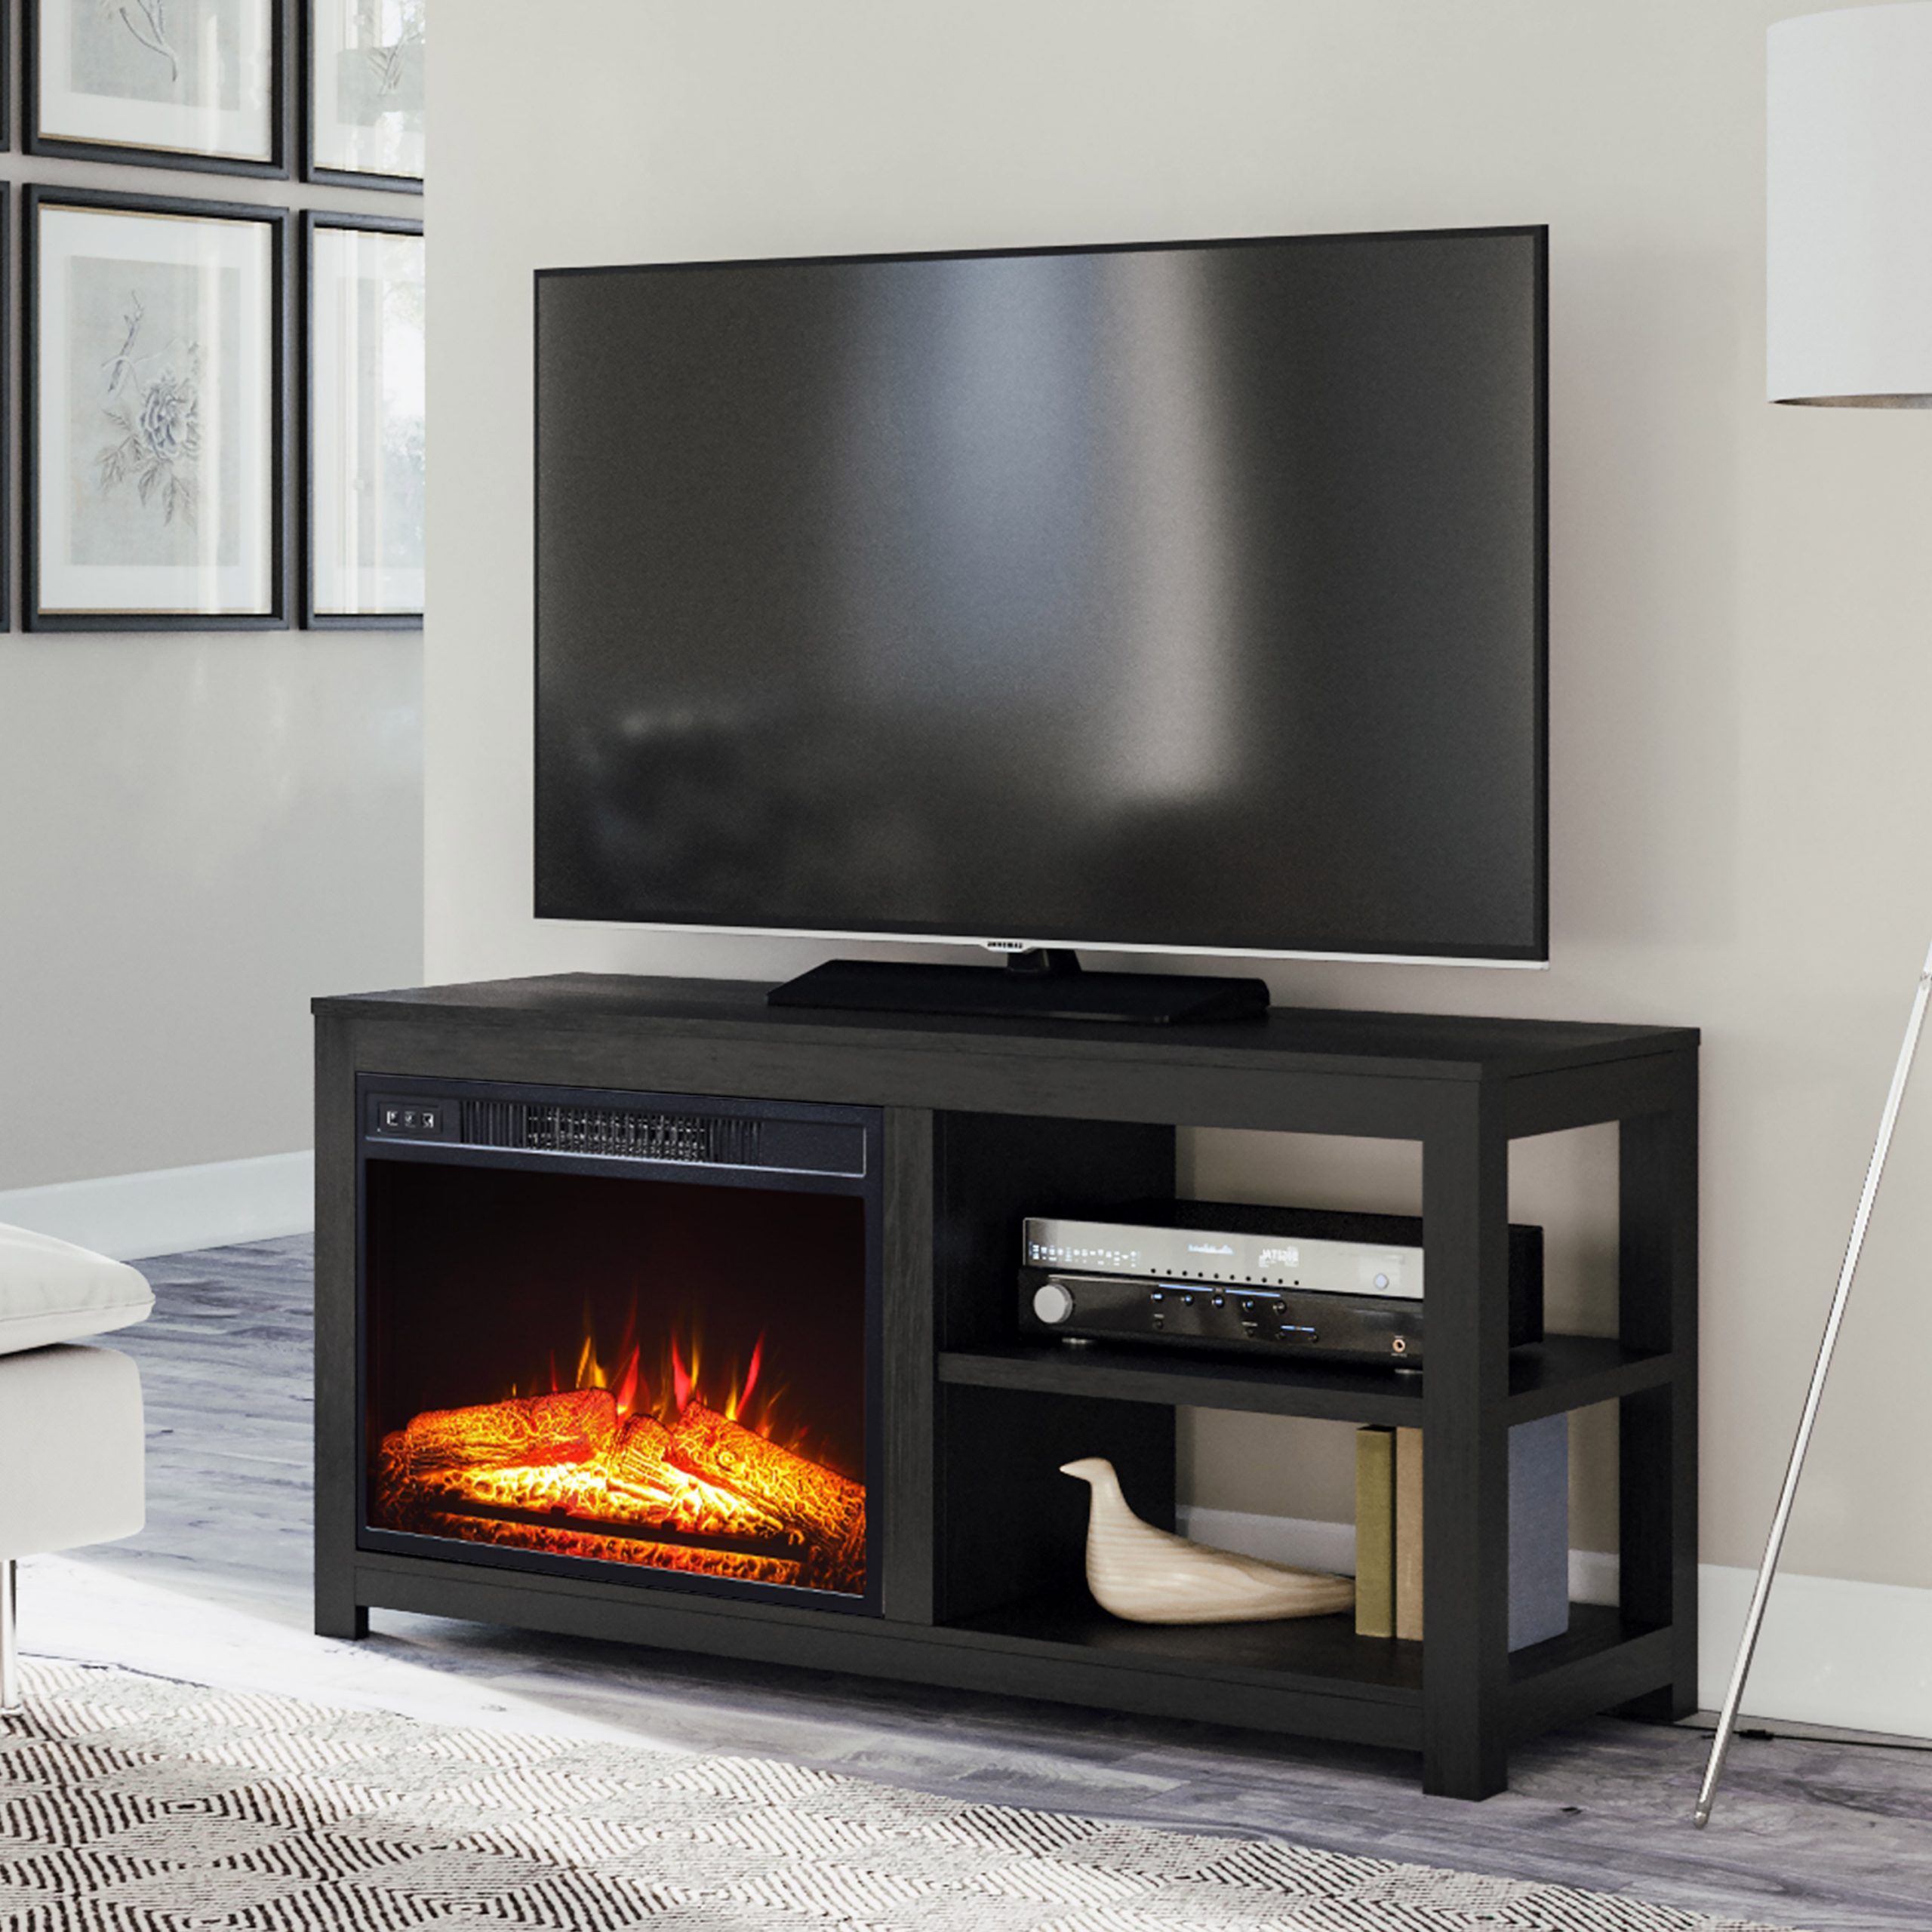 Mainstays 2 Shelf Media Fireplace Tv Stand For Flat Panel In Fireplace Media Console Tv Stands With Weathered Finish (View 5 of 20)